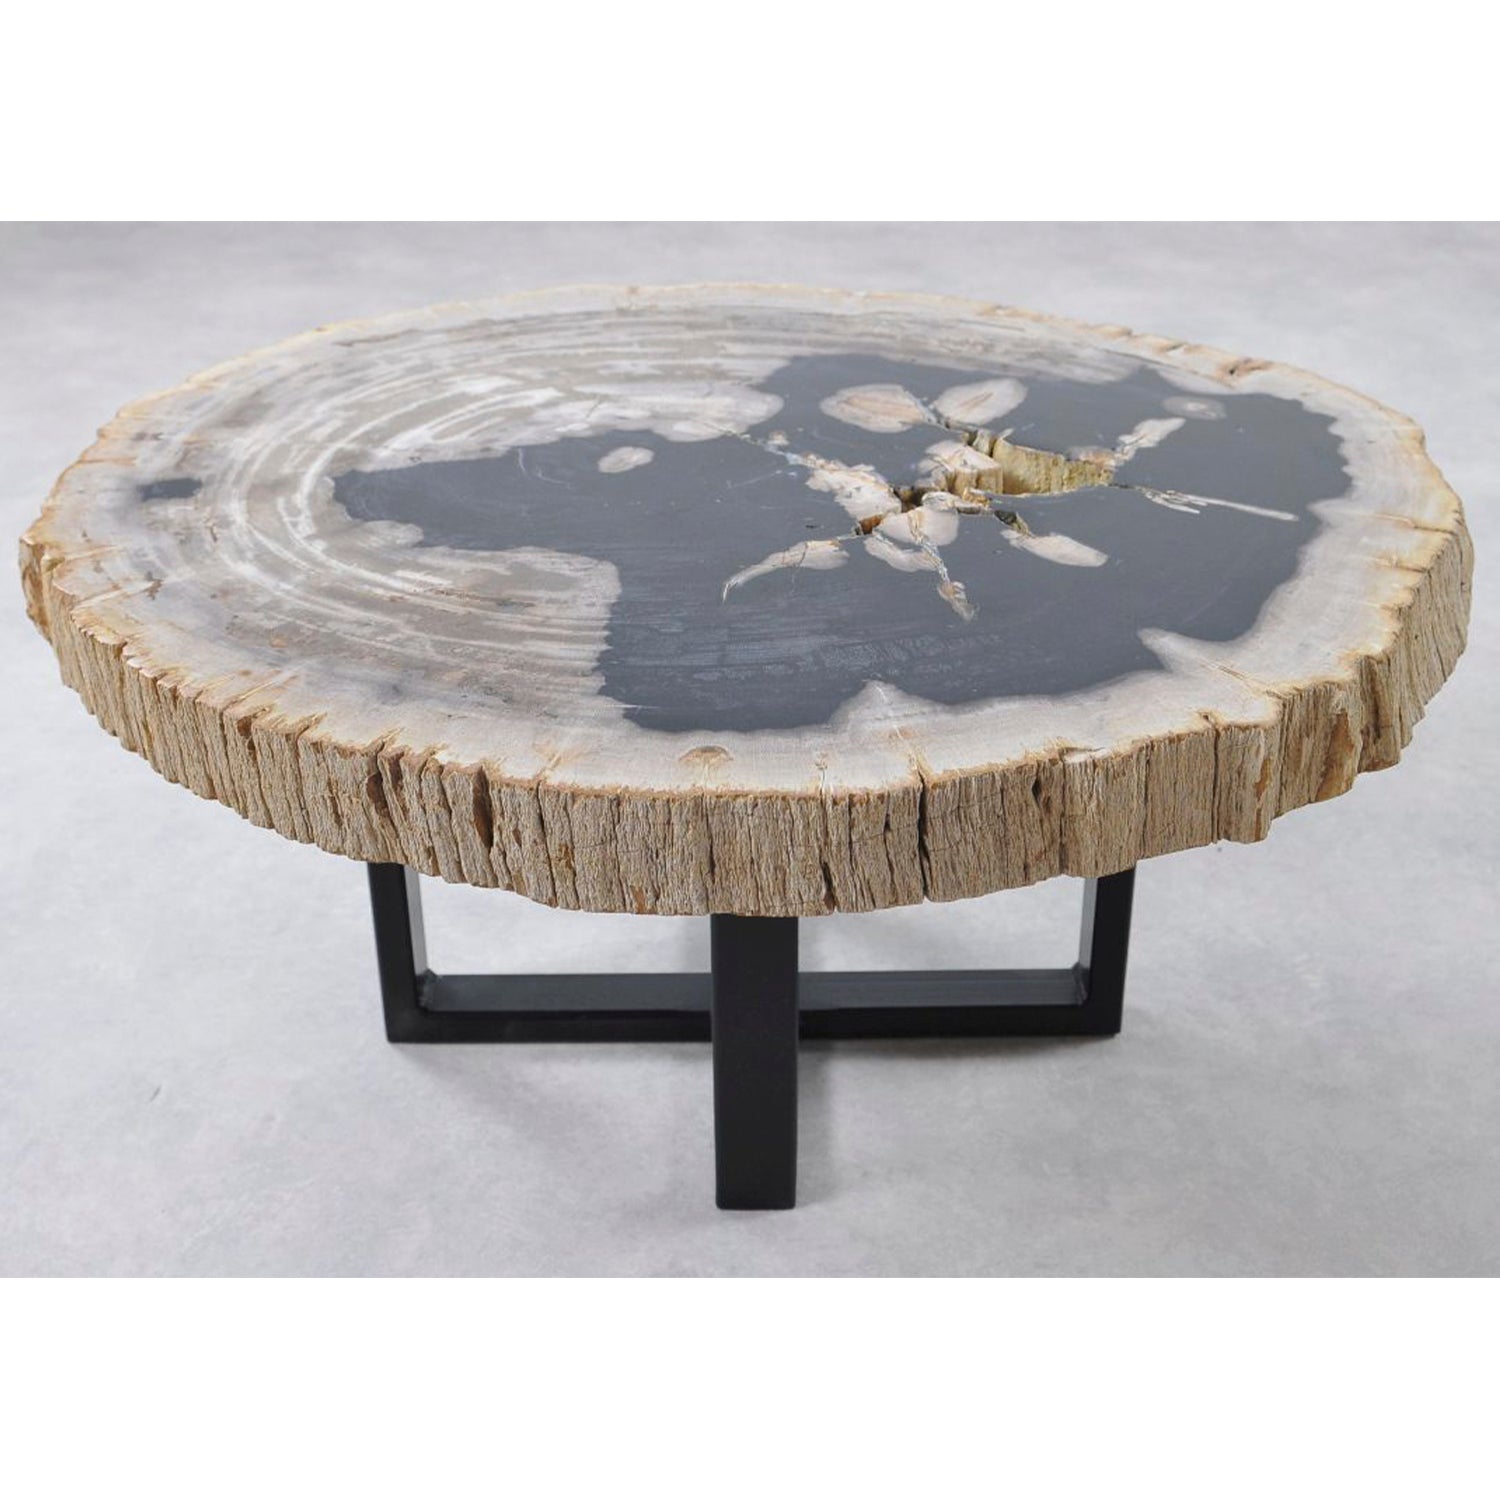 NATURAL WOOD FOSSIL TABLE